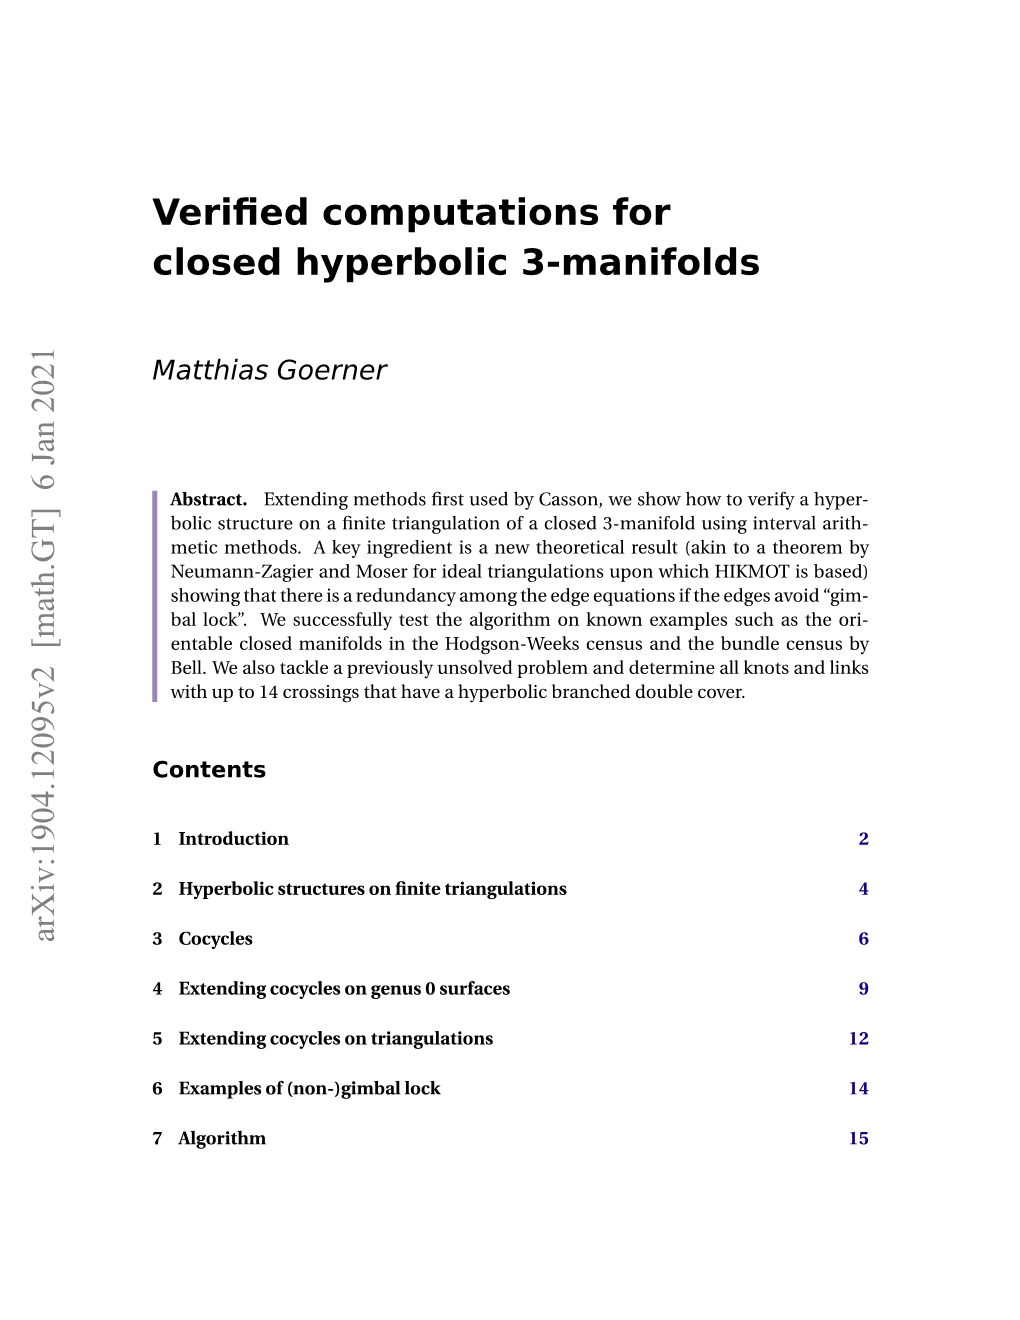 Verified Computations for Closed Hyperbolic 3-Manifolds